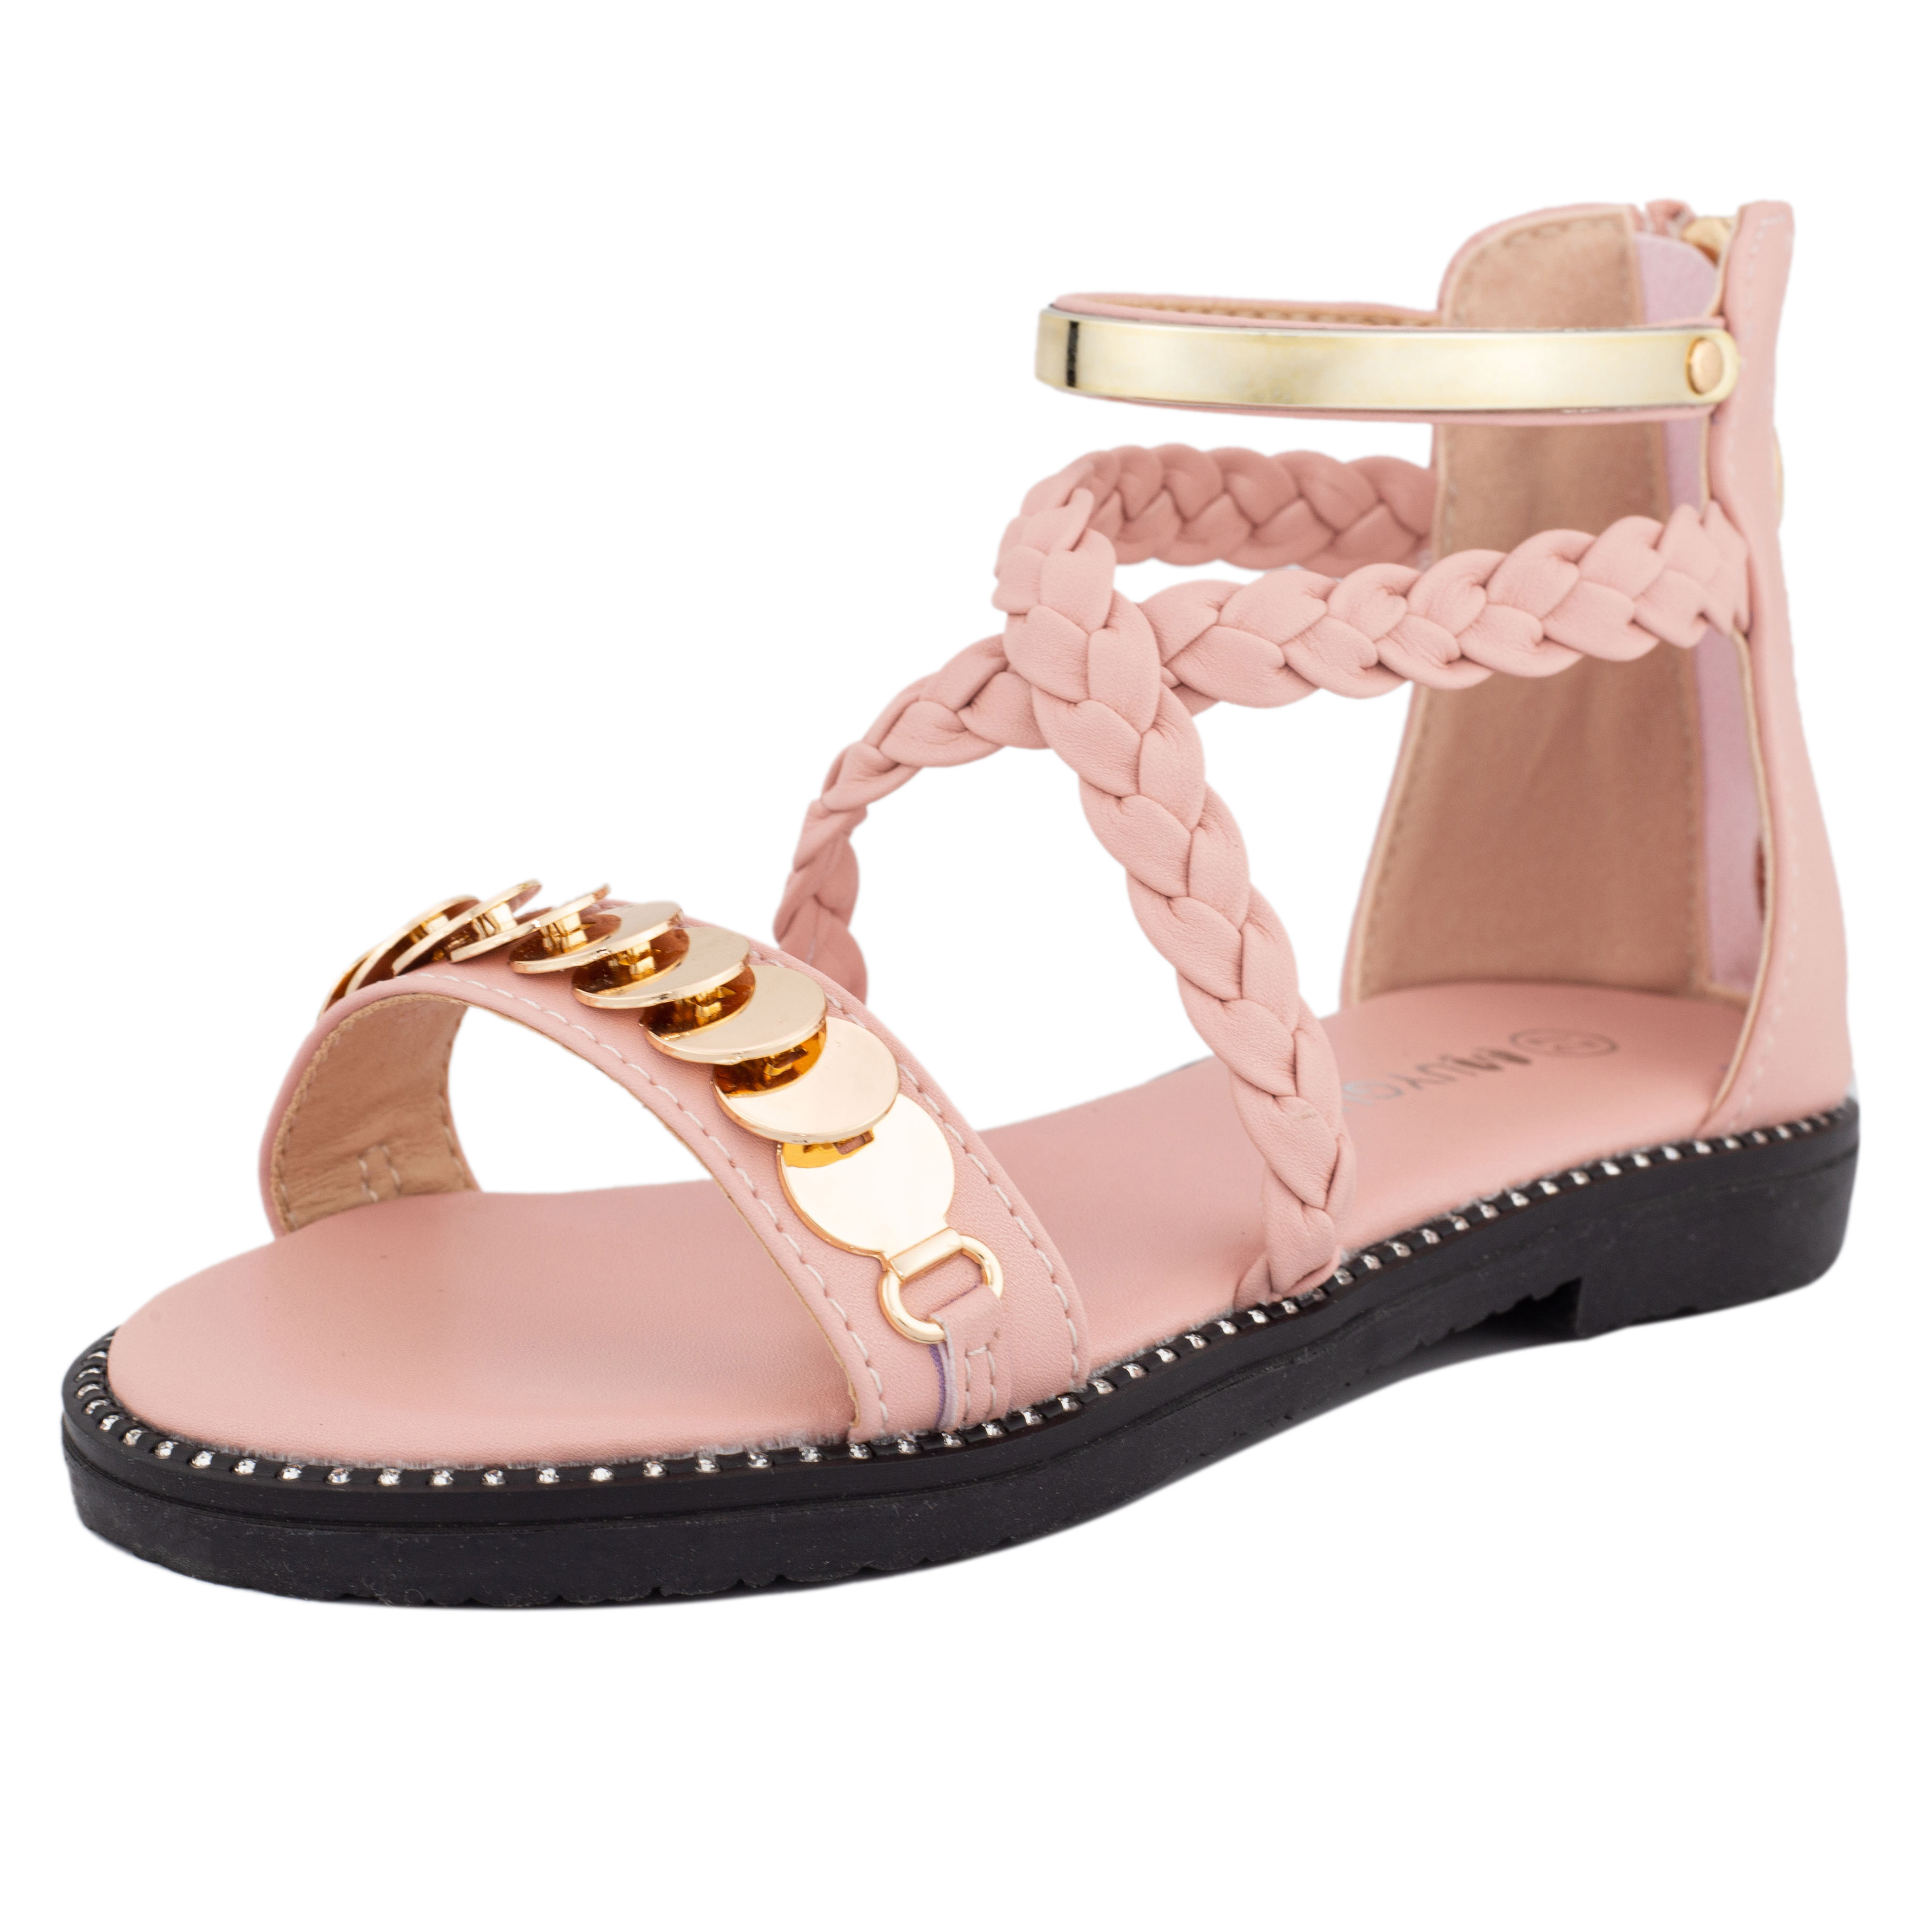 Girls Gladiator Sandals with Sequins Zipper Strappy Summer Shoes for Toddler/Little Girl